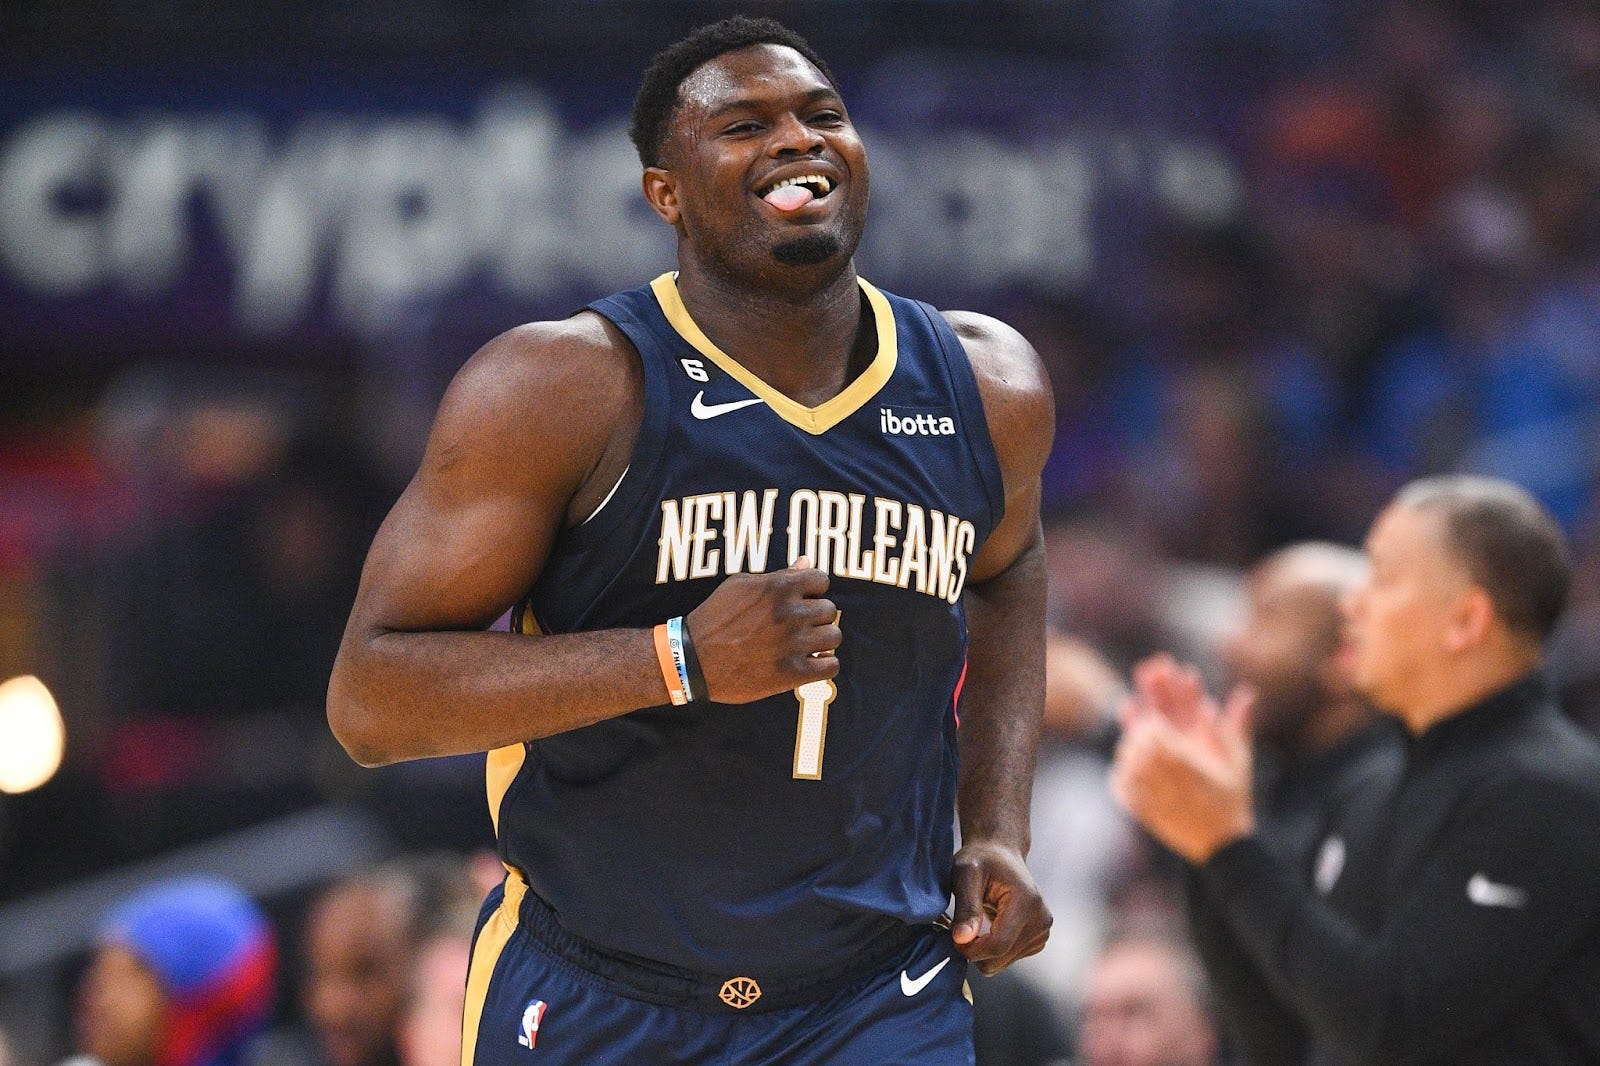 With health a huge concern so far in Zion's career, the Pelican's are looking for him to get a full season of play this time around in order to reach their full potential.